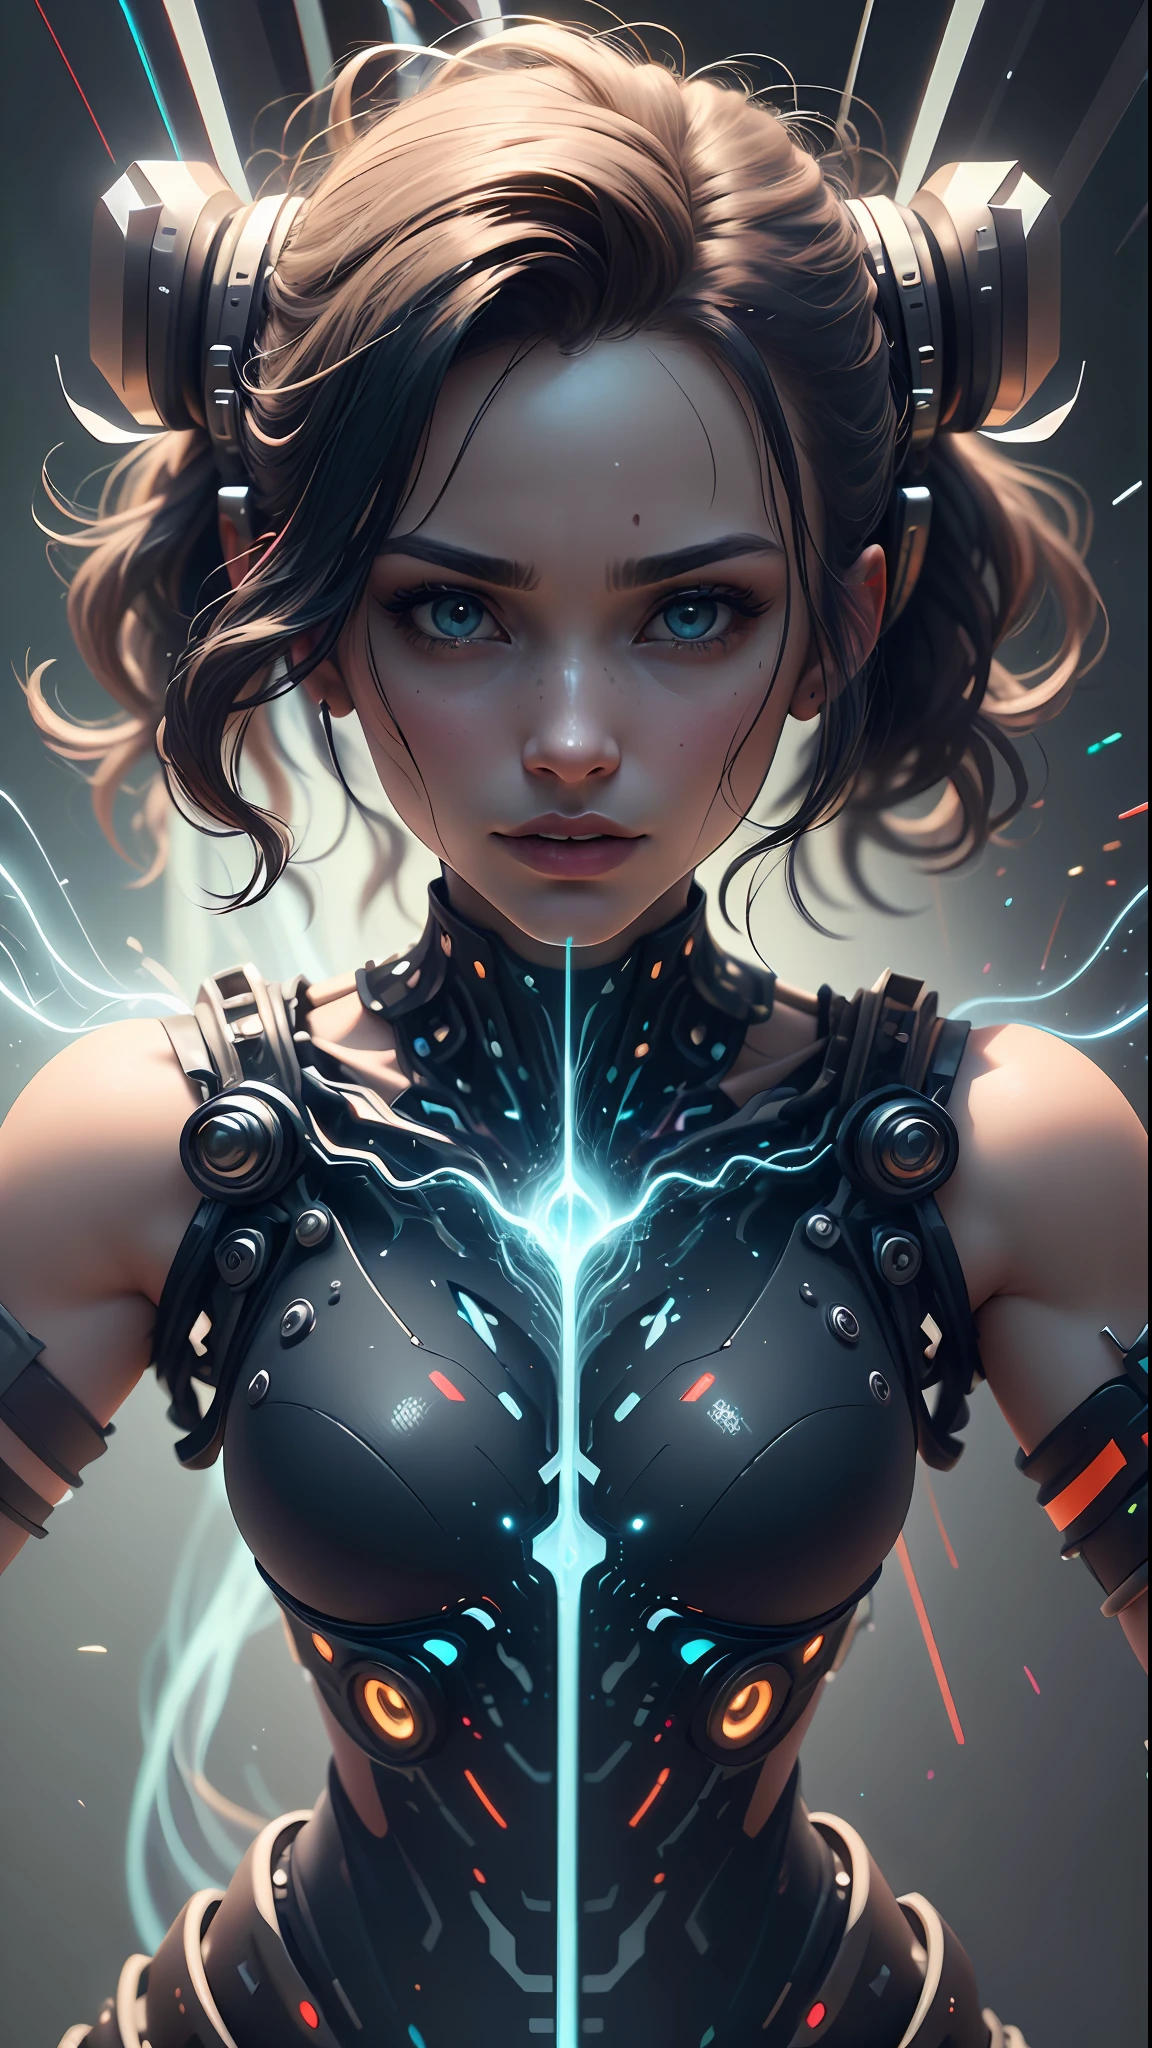 ((Best quality)), ((masterpiece)), (detailed:1.4), 3D, an image of a beautiful cyberpunk female with thick voluminous hair,light particles, pure energy chaos antitech,HDR (High Dynamic Range),Ray Tracing,NVIDIA RTX,Super-Resolution,Unreal 5,Subsurface scattering,PBR Texturing,Post-processing,Anisotropic Filtering,Depth-of-field,Maximum clarity and sharpness,Multi-layered textures,Albedo and Specular maps,Surface shading,Accurate simulation of light-material interaction,Perfect proportions,Octane Render,Two-tone lighting,Wide aperture,Low ISO,White balance,Rule of thirds,8K RAW